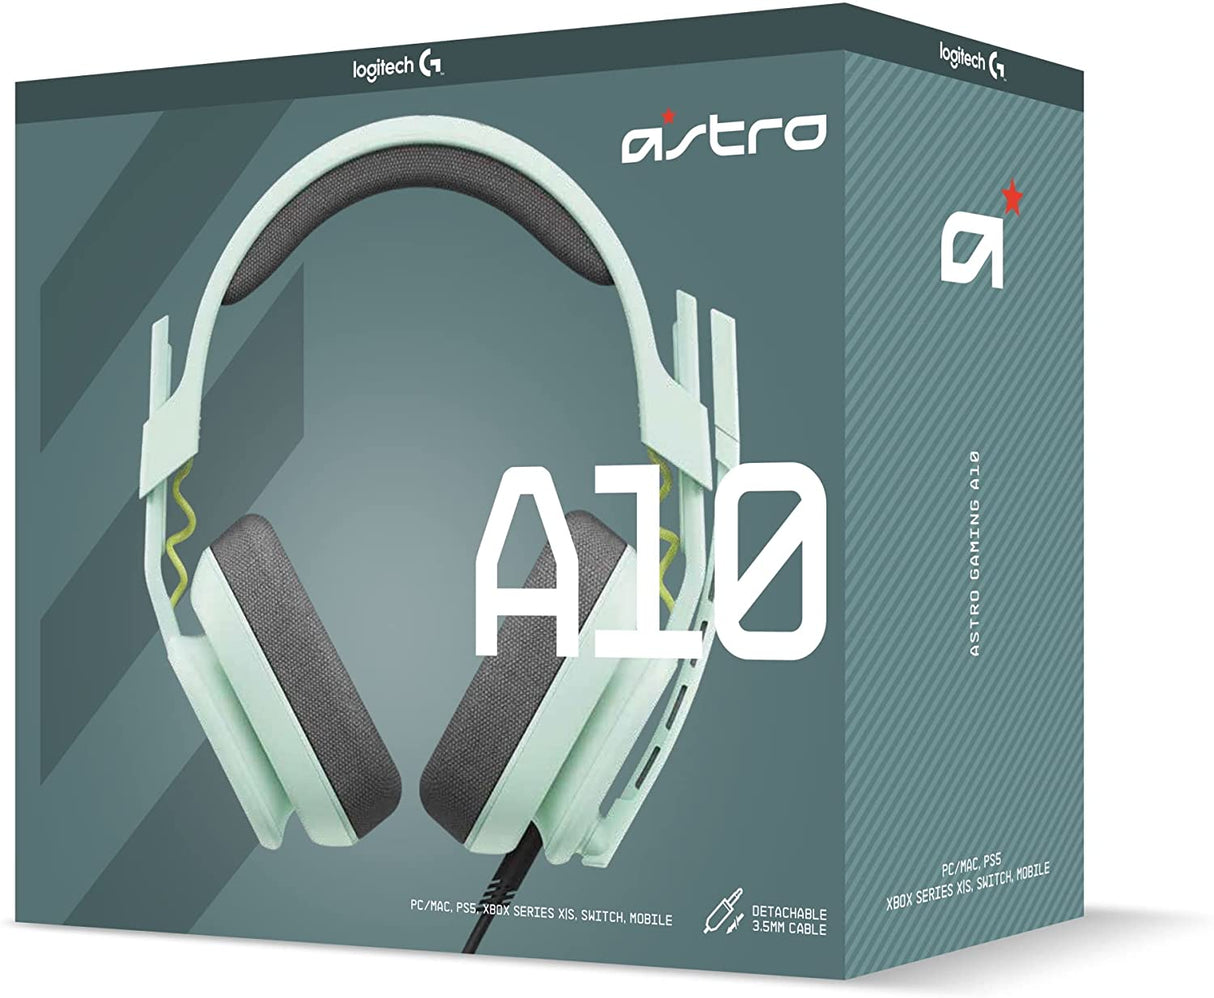 Astro gaming Astro A10 Gaming Headset Gen 2 Wired Headset - Over-Ear Gaming Headphones with flip-to-Mute Microphone, 32 mm Drivers, for Xbox Series X|S, Xbox One, Playstation 5/4, Nintendo Switch, PC, Mac - Mint Mint Gen 2 Cross Platform Headset Only